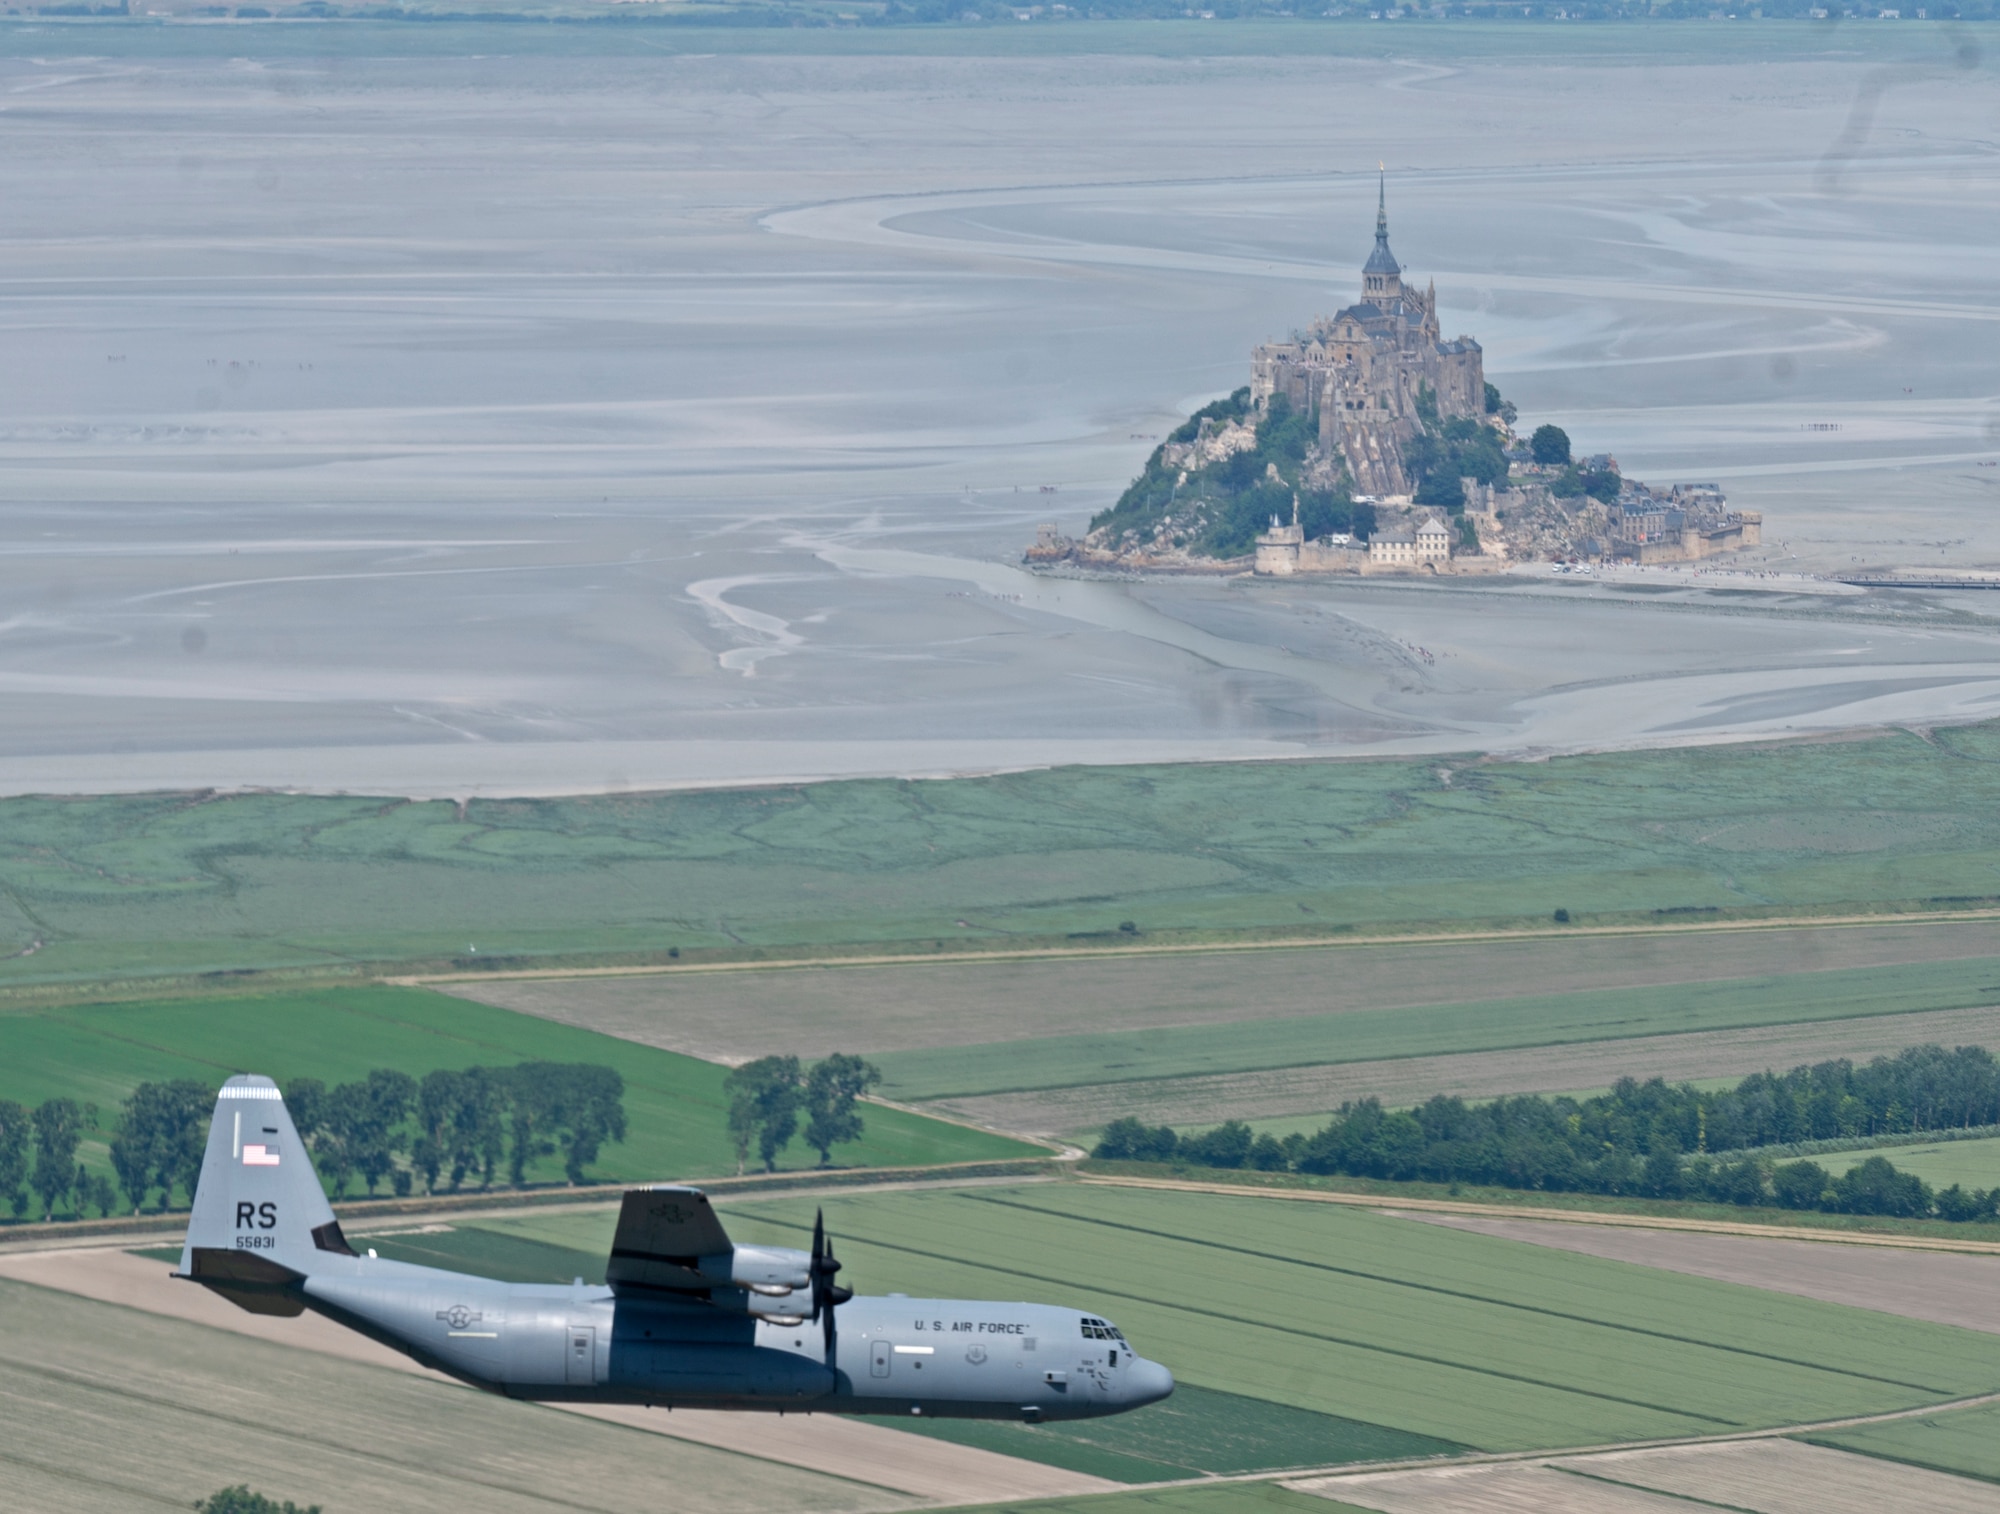 A C-130J out of Ramstein Air Base, Germany piloted by Brig. Gen. Josh Olson, 86th Airlift Wing commander, flies past Mont Saint-Michel, France, June 4, 2022. Olson came to Normandy to participate in events as well as train with the 37th Airlift Squadron by joining them in low-level flight training. (U.S. Air Force photo by Senior Airman Thomas Karol)